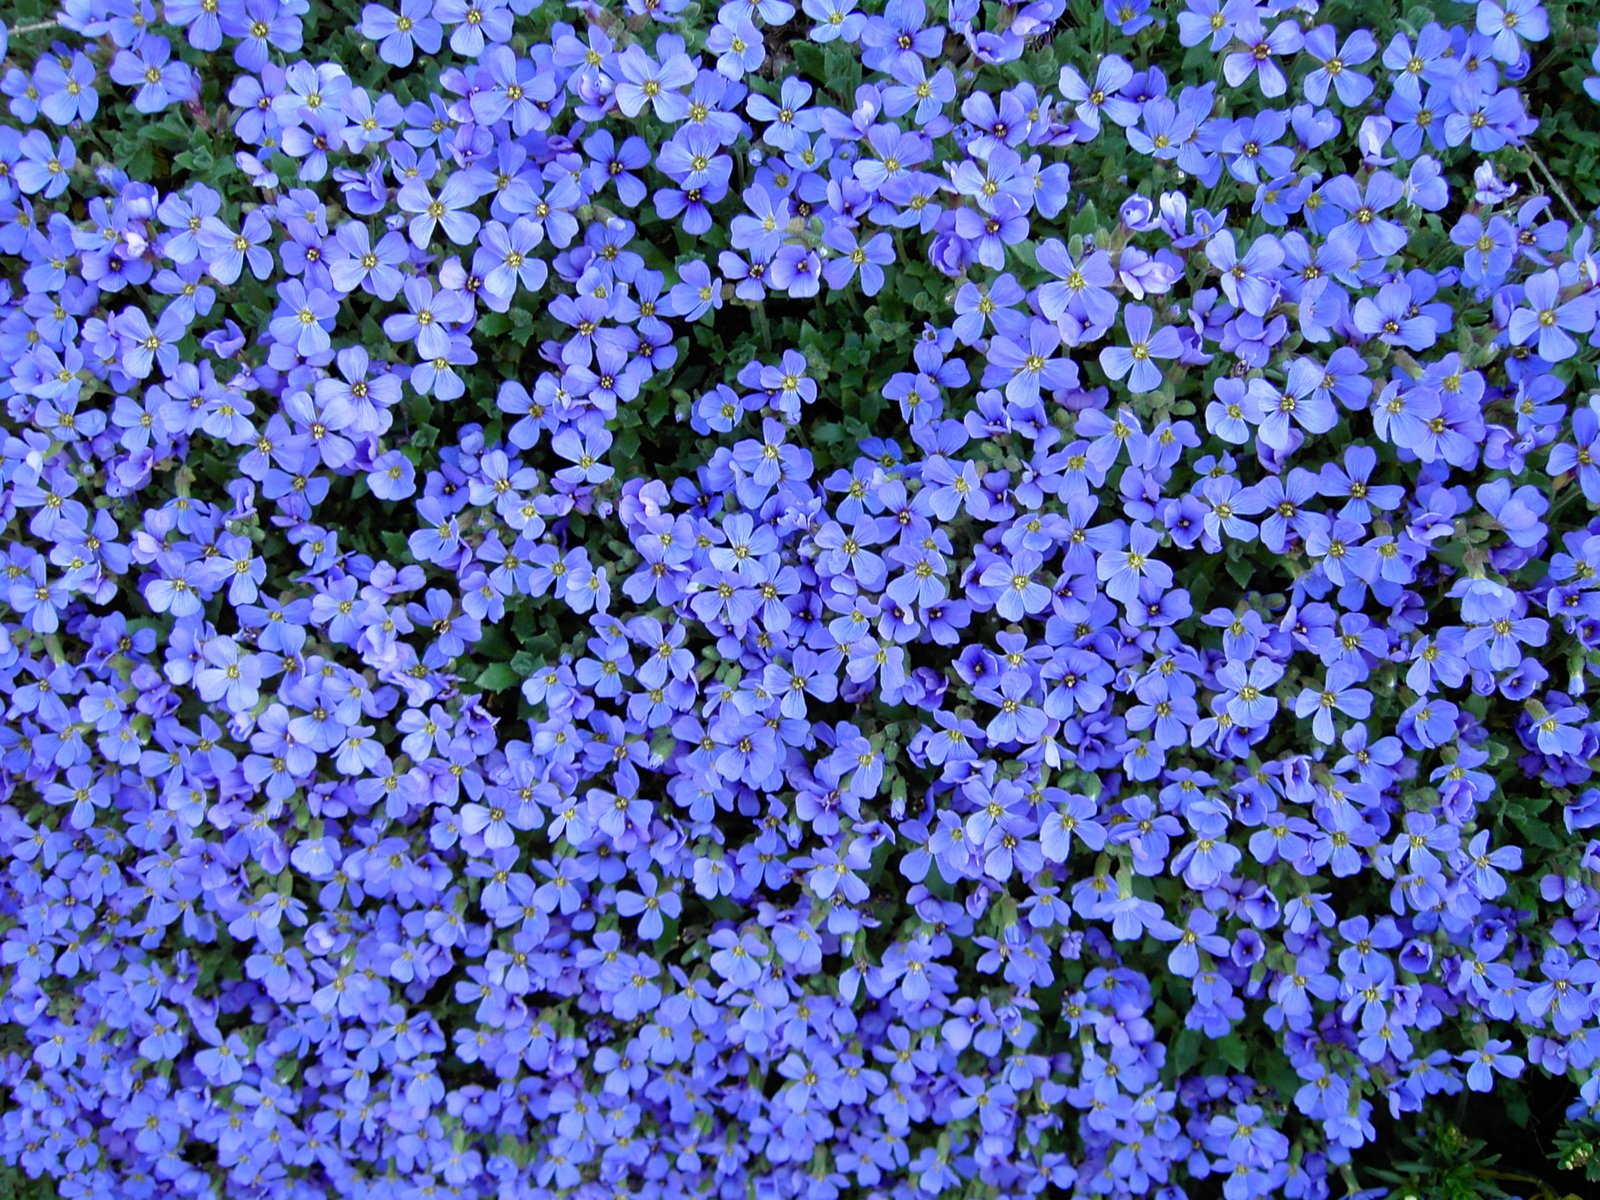 a lot of purple flowers on the ground